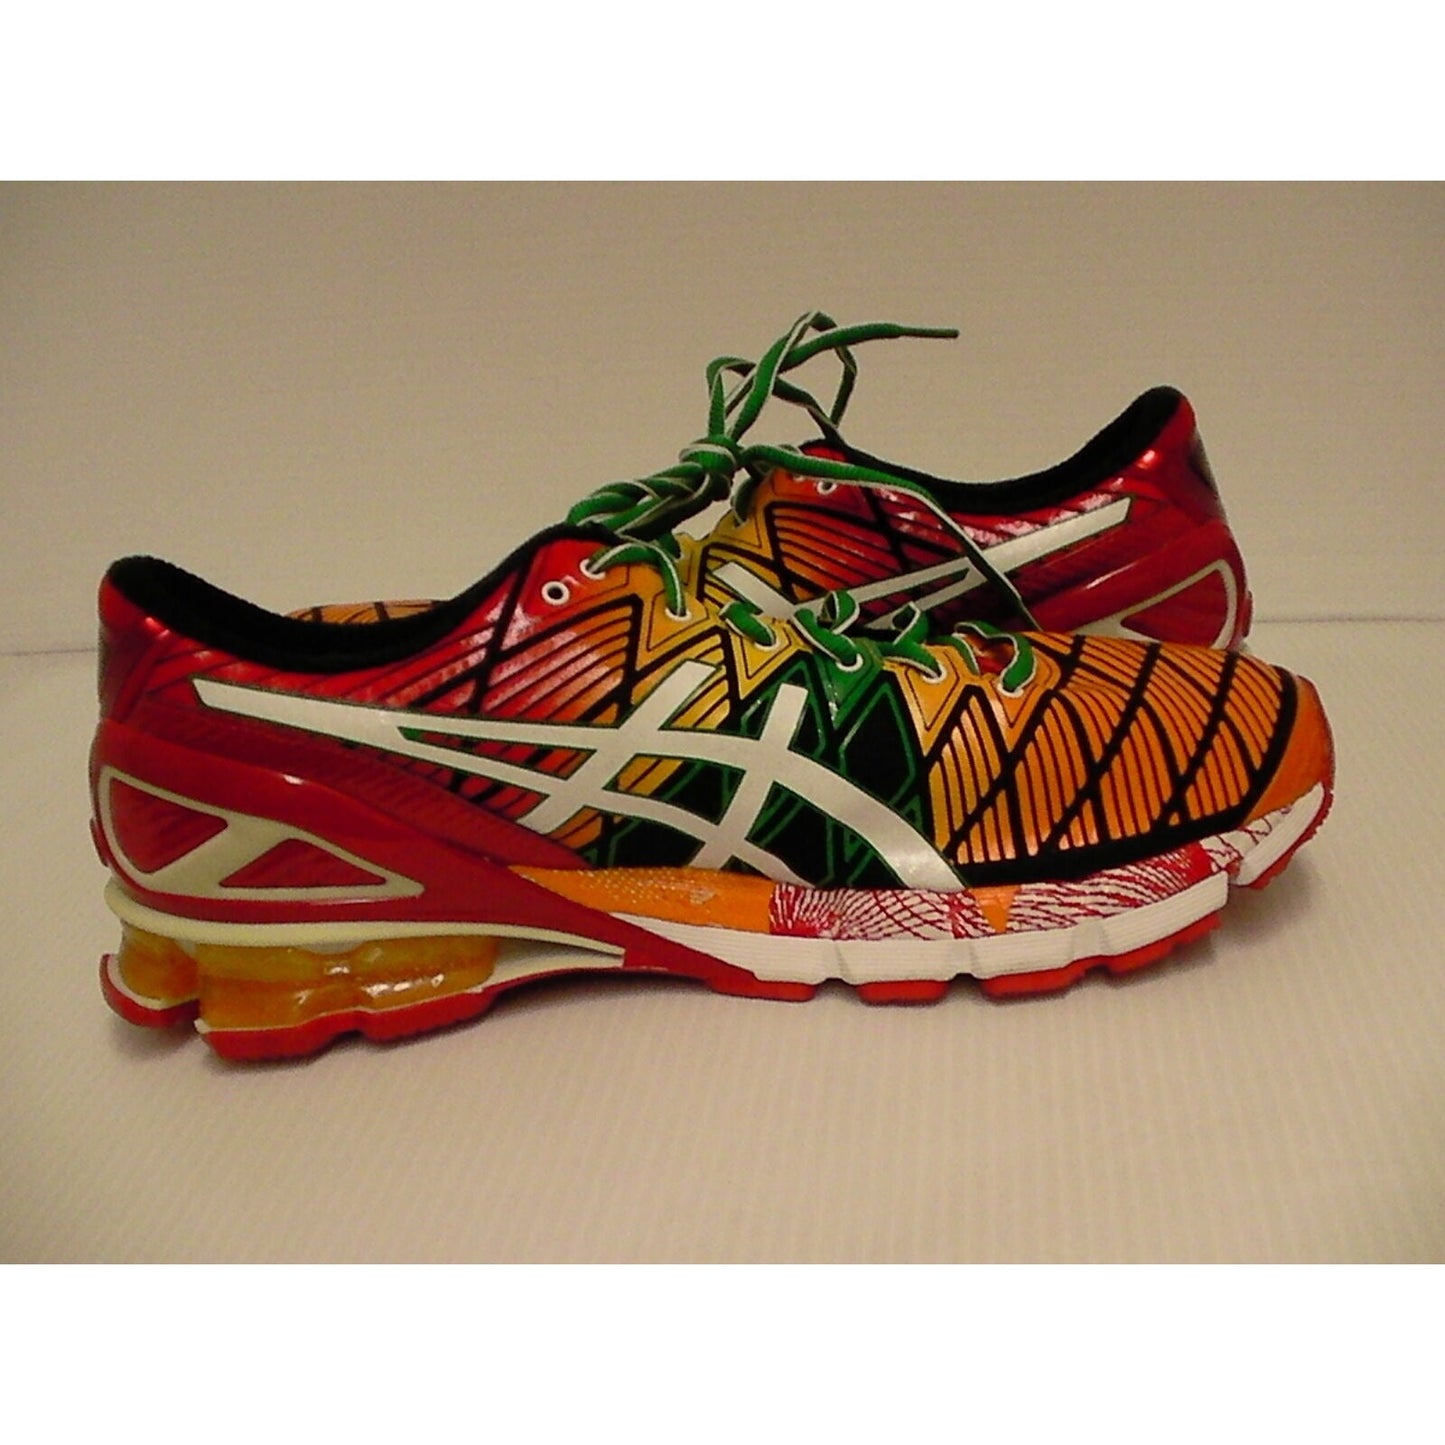 Mens Asics running shoes GEL-KINSEI 5 multi color size 11 us - Classic Fashion Deals